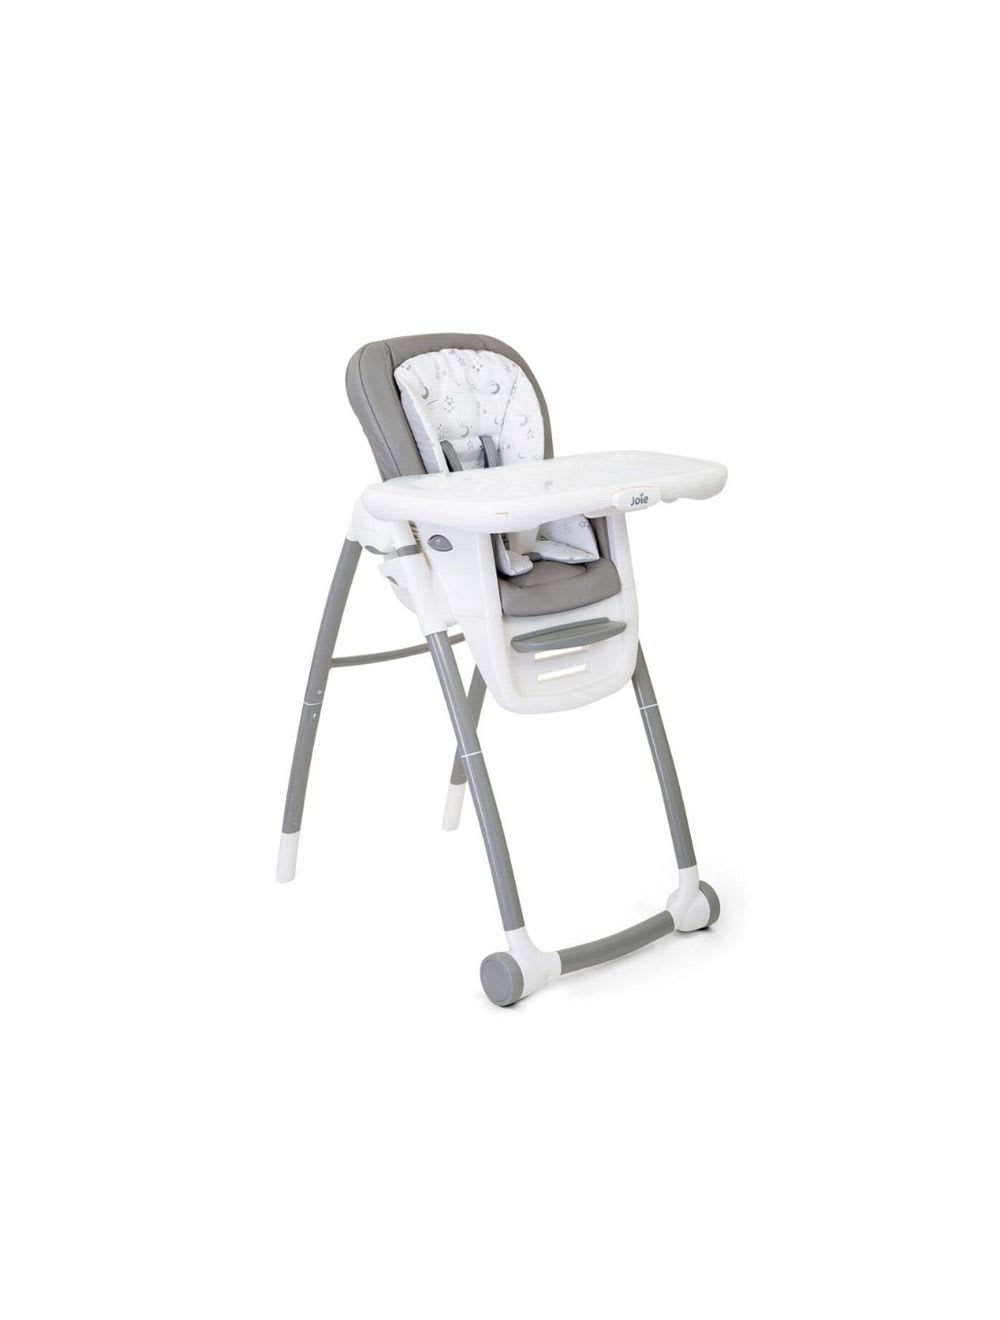 Joie Baby Multiply 6 in 1 High Chair